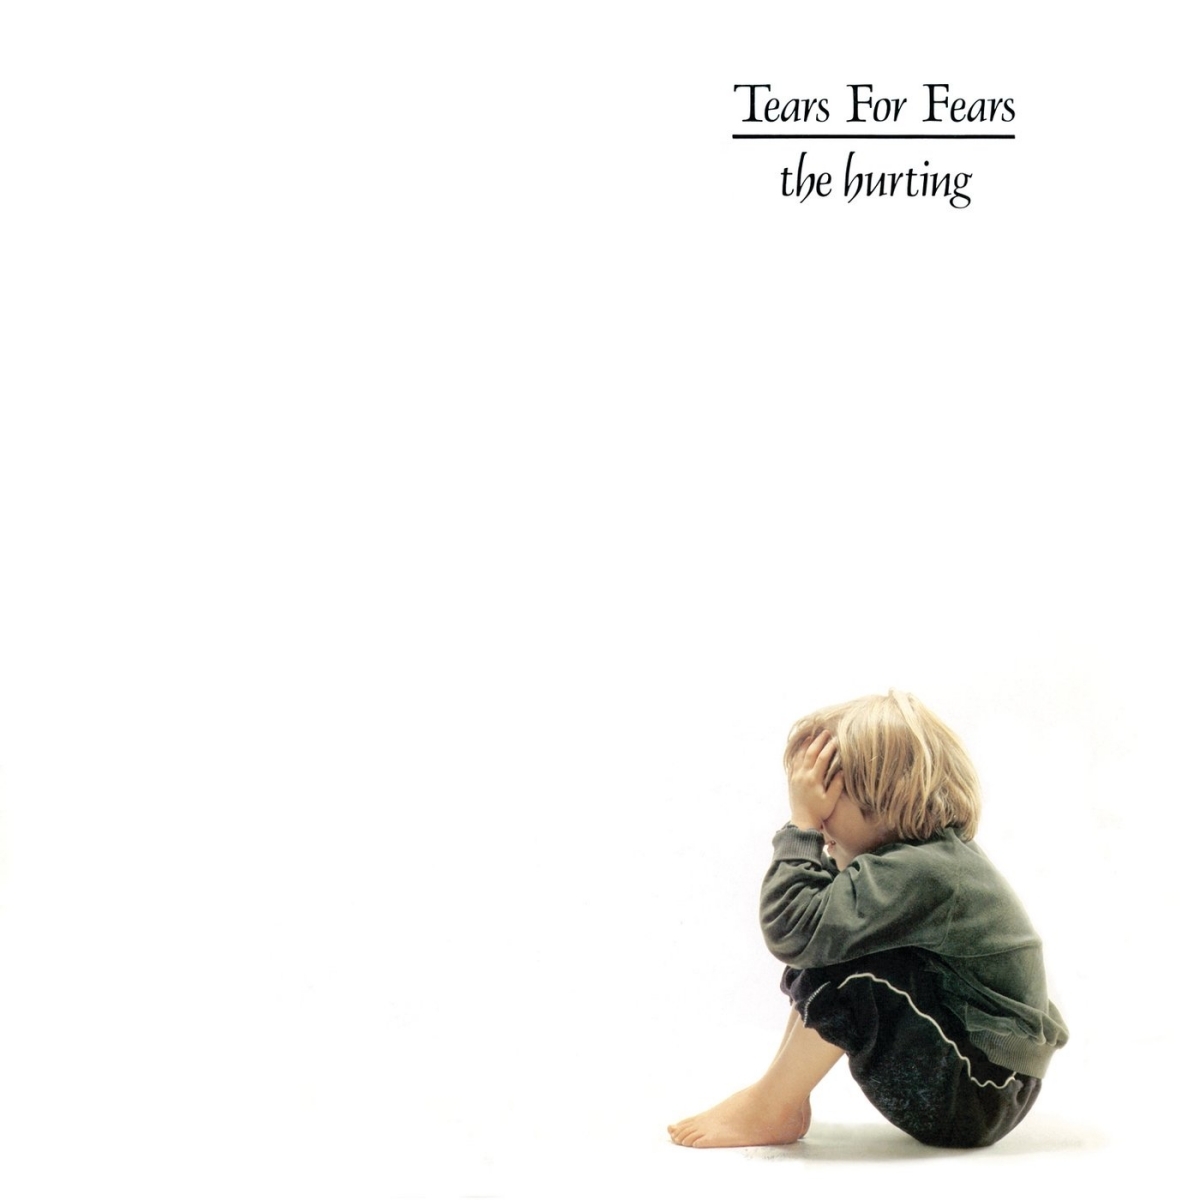 <p>The <a href="http://www.musicpopstars.com/tears-for-fears/biography/prt.html" class="CMY_Link CMY_Valid">band</a> released their <a href="https://www.allmusic.com/artist/tears-for-fears-mn0000019892/discography" class="CMY_Link CMY_Redirect CMY_Valid">debut album</a> <em>The Hurting</em> in 1983. With songs that focused on the emotional turmoil of youth, the album reached No. 1 in the UK and featured three songs that became top-five UK singles.</p>